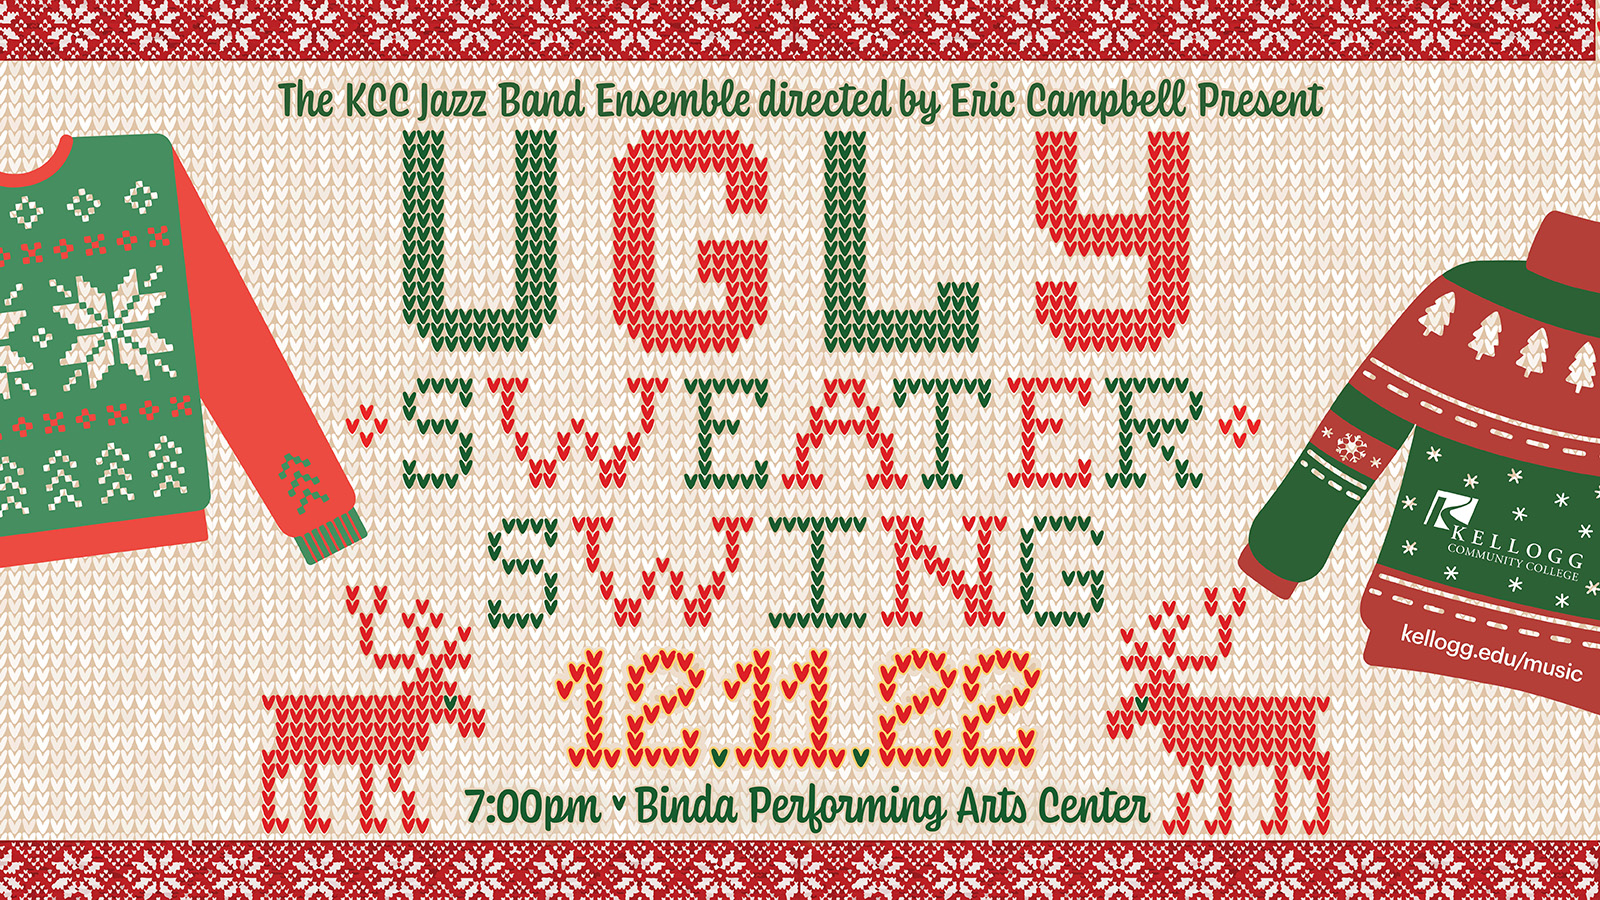 The Ugly Holiday Sweater Band - I Melt With You (13-Dec-19) on Vimeo